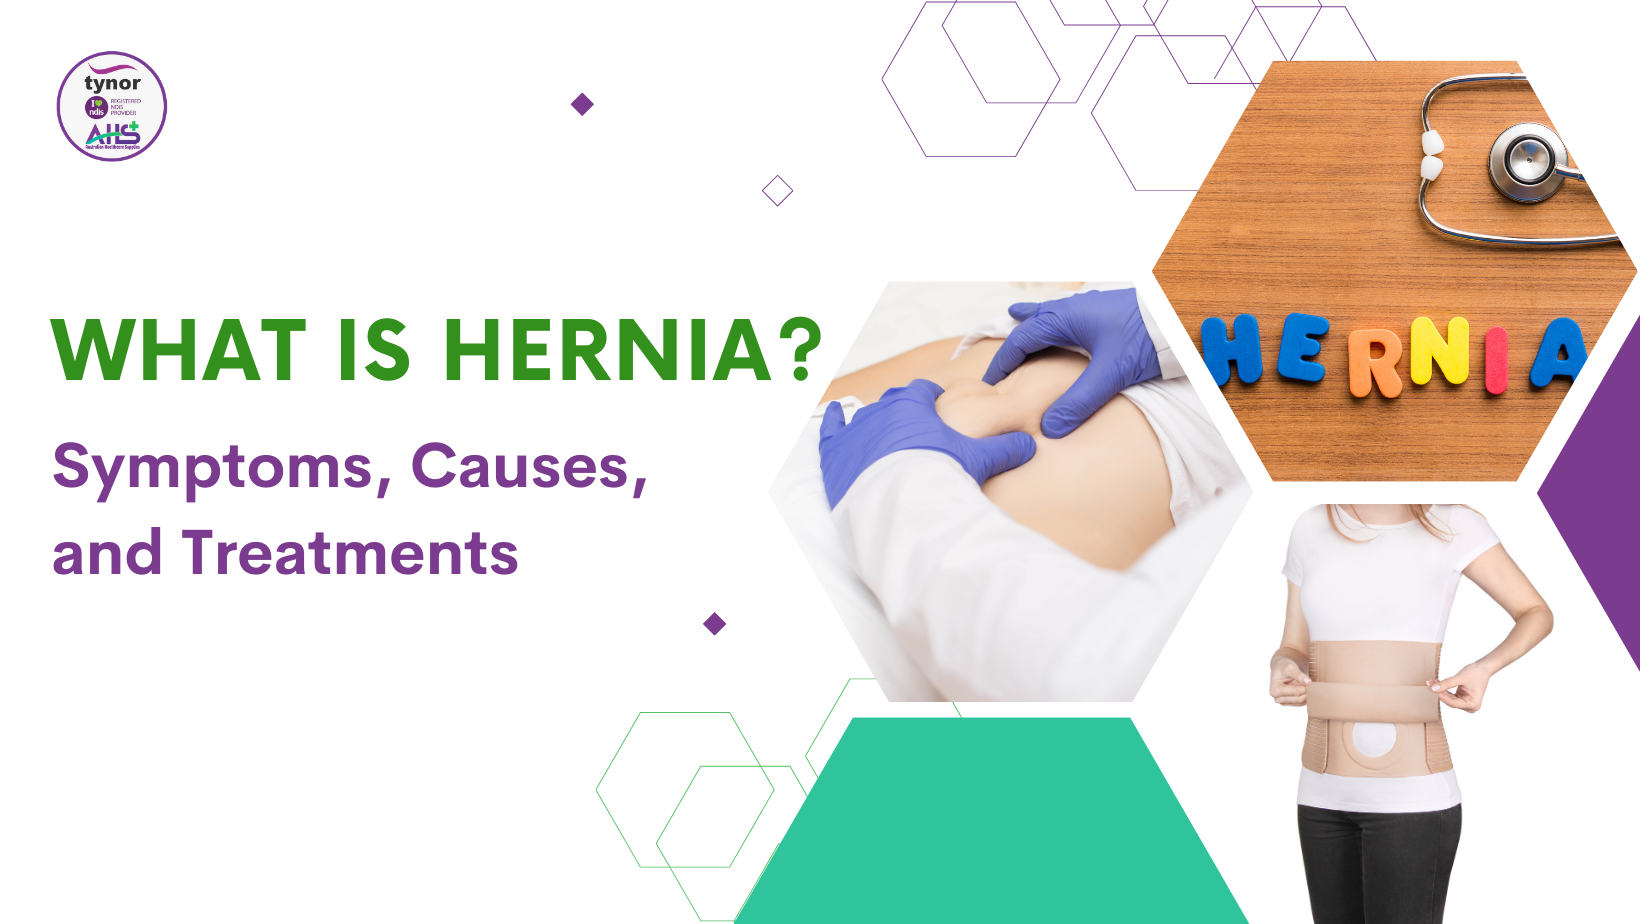 What is Hernia? Symptoms, Causes, and Treatments